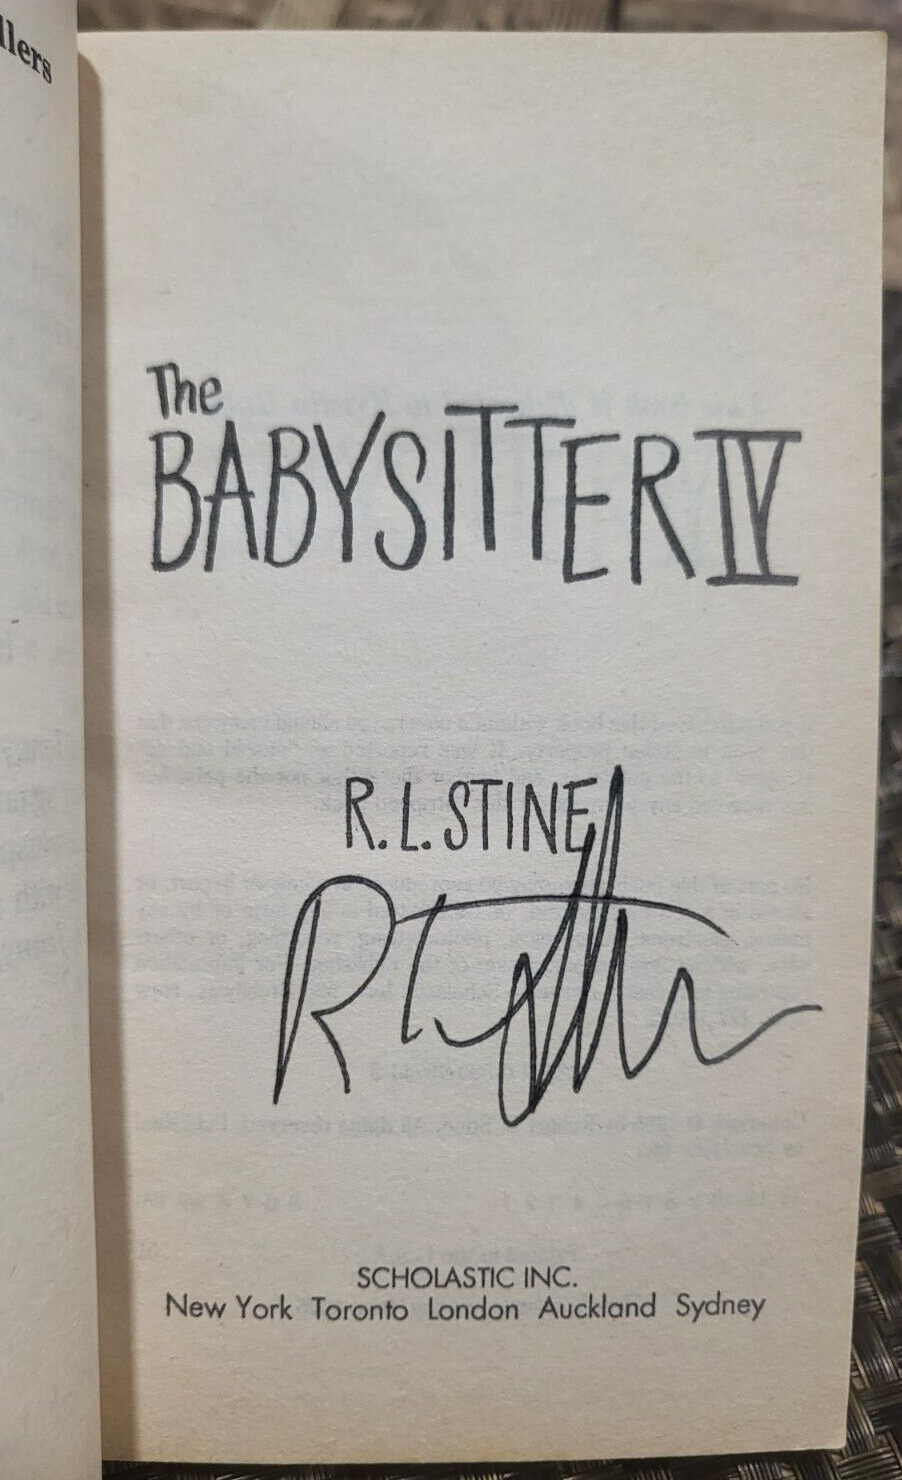 RL STINE THE BABYSITTER/GOOSEBUMPS SIGNED AUTOGRAPHED BOOK RARE W/COA AUTHENTIC